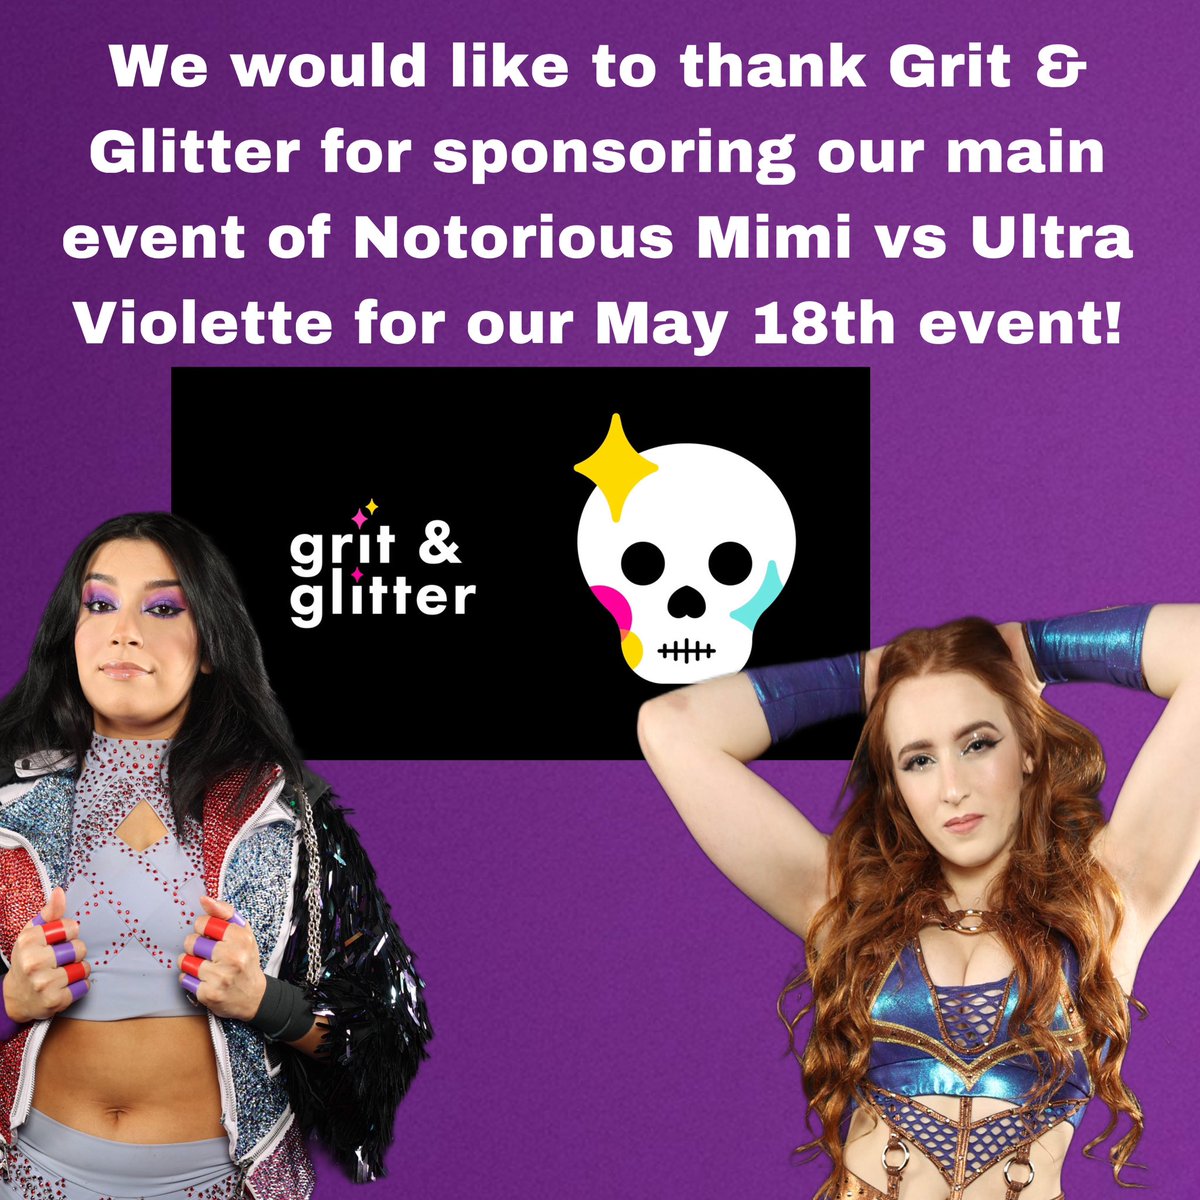 We would like to thank Grit & Glitter podcast for sponsoring our main event of Ultra Violette vs Notorious Mimi on May 18th! @notorious_mimi @gritglitterpod